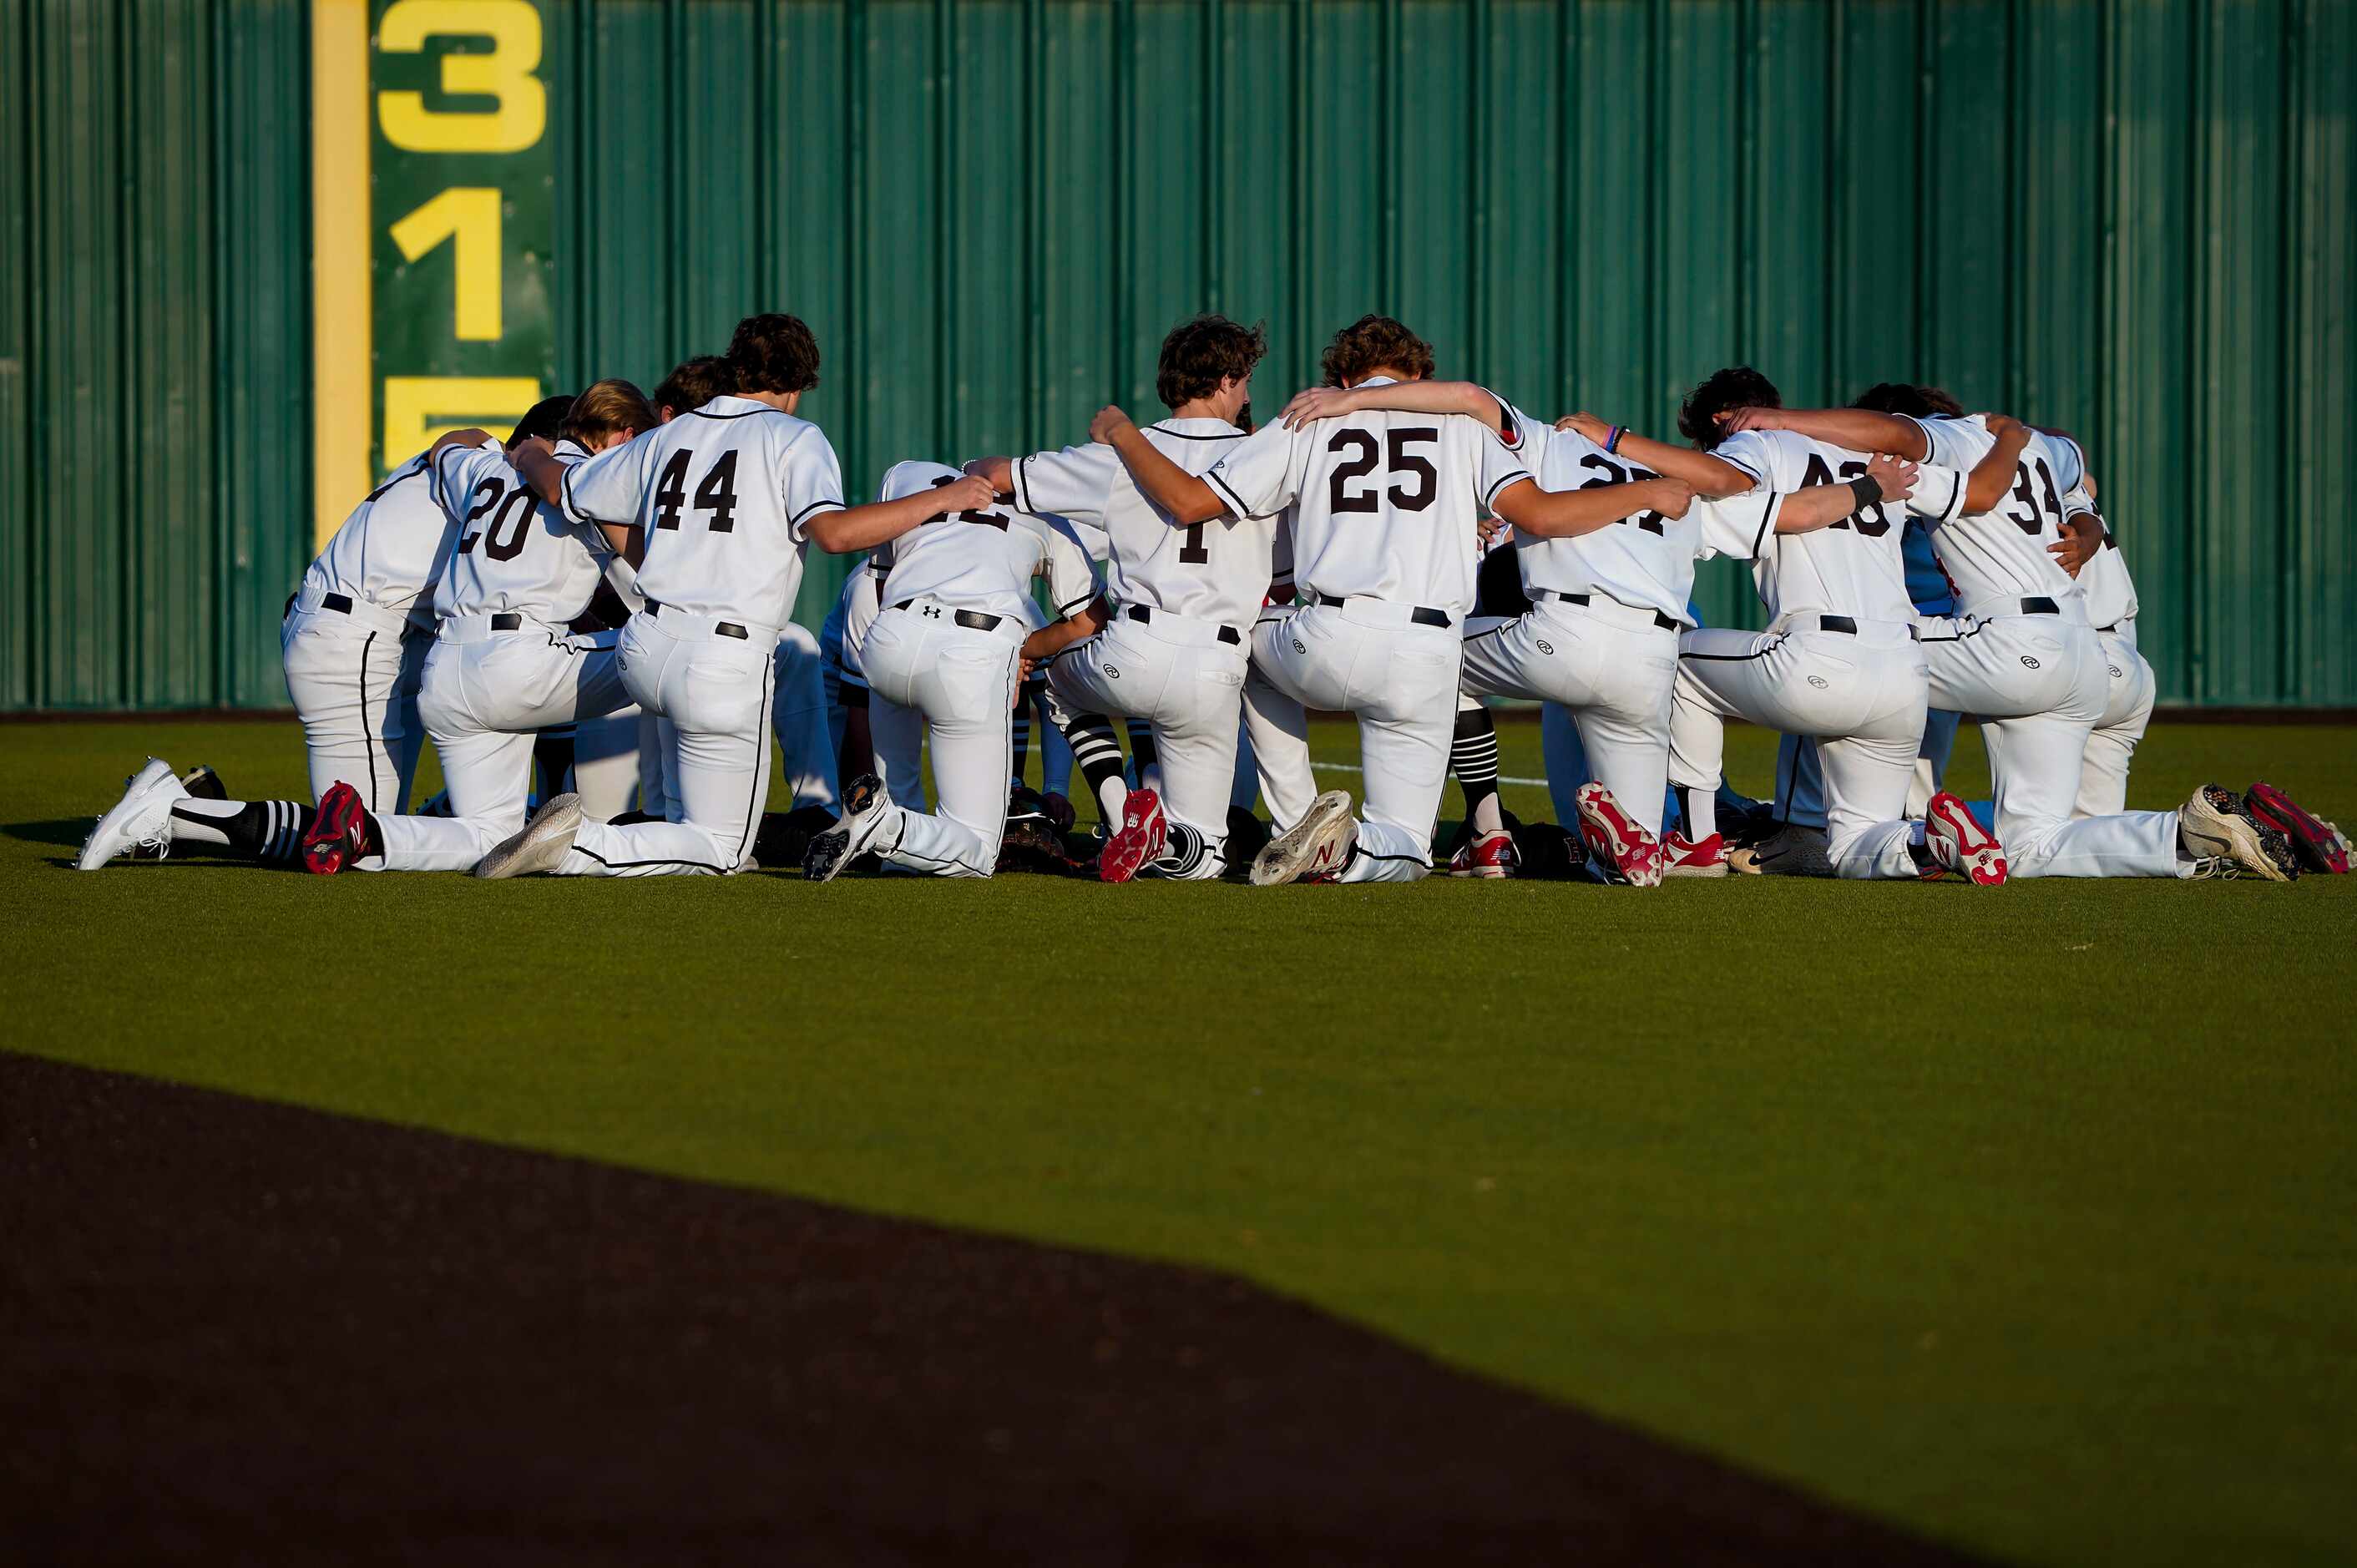 Rockwall-Heath players take a knee in the outfield before a district 10-6A high school...